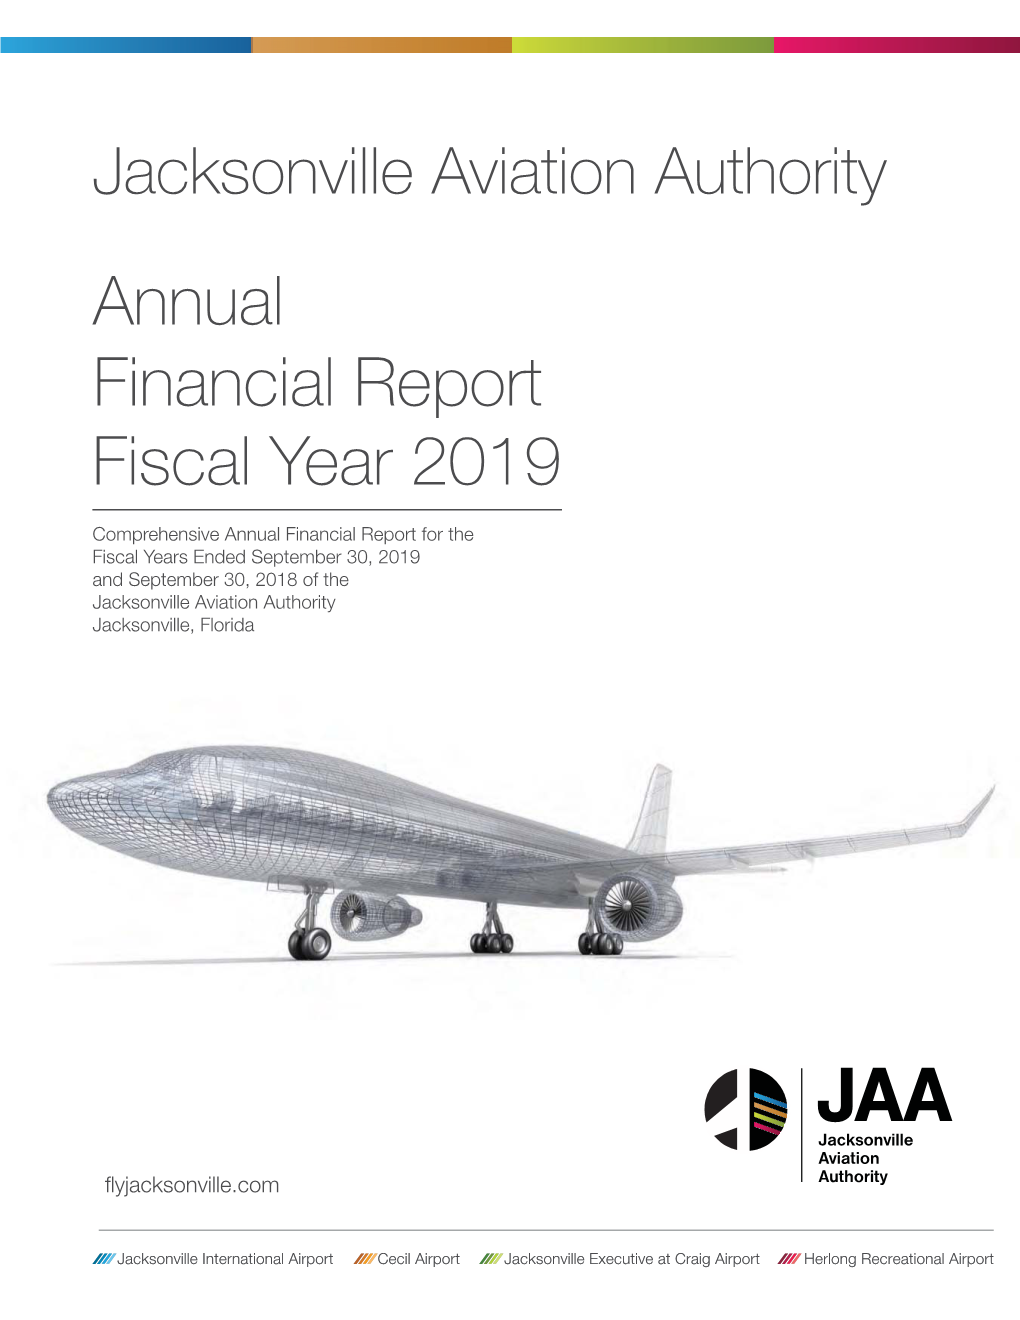 Annual Financial Report Fiscal Year 2019